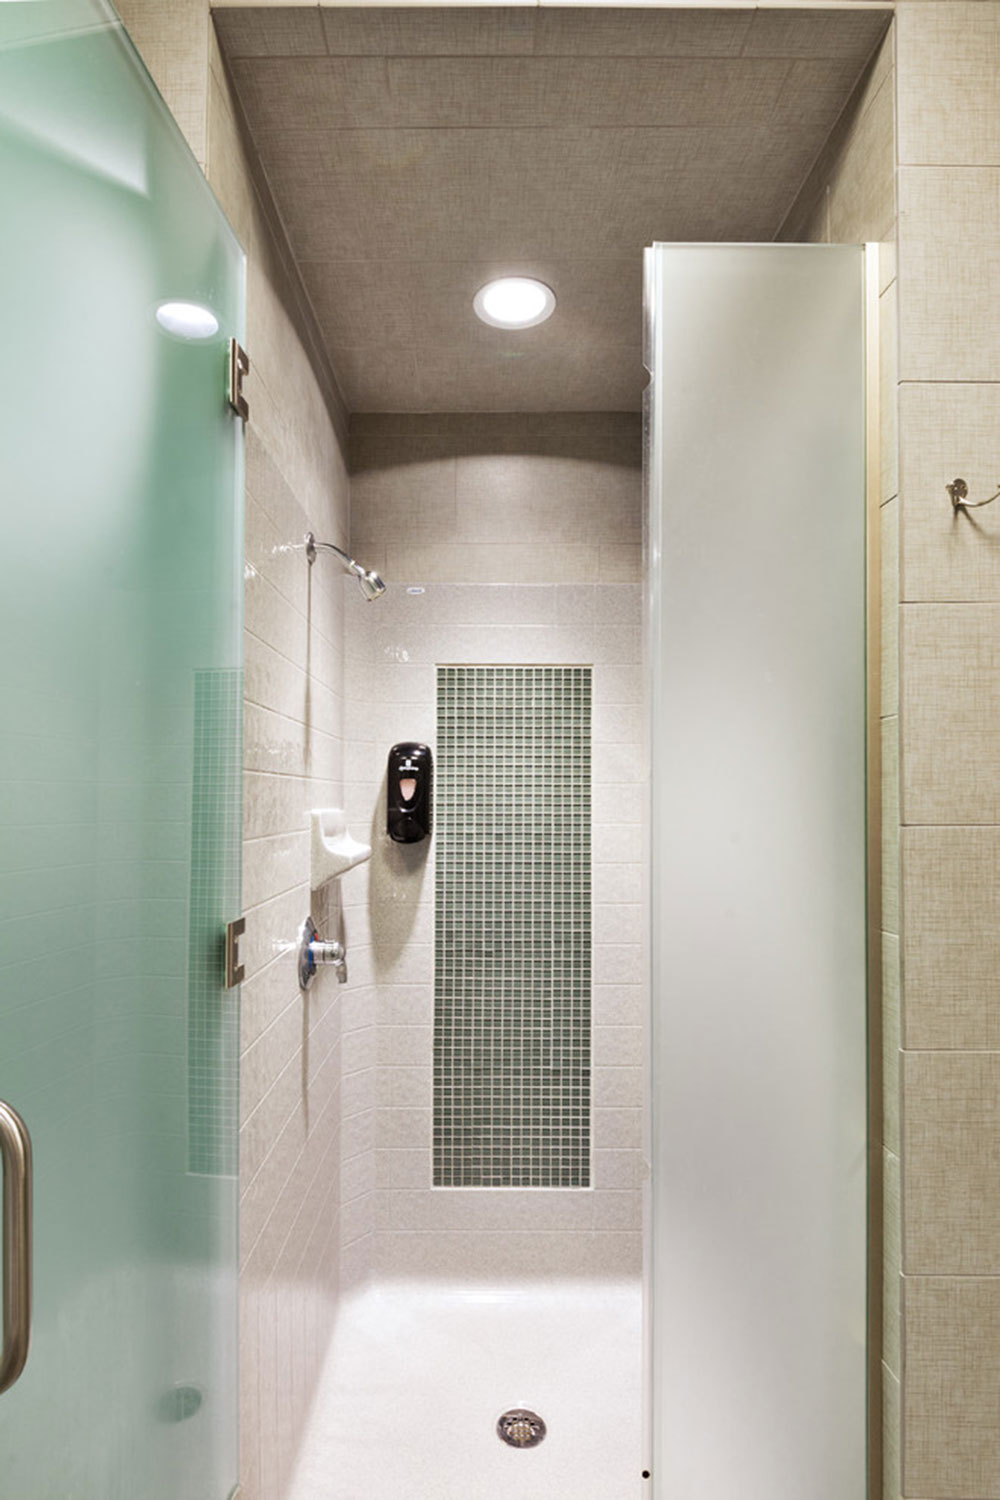 Bestbath-commercial-shower-ada-shower-barrier-free-shower-by-Bestbath How to clean fiberglass shower (Quick tips to use)